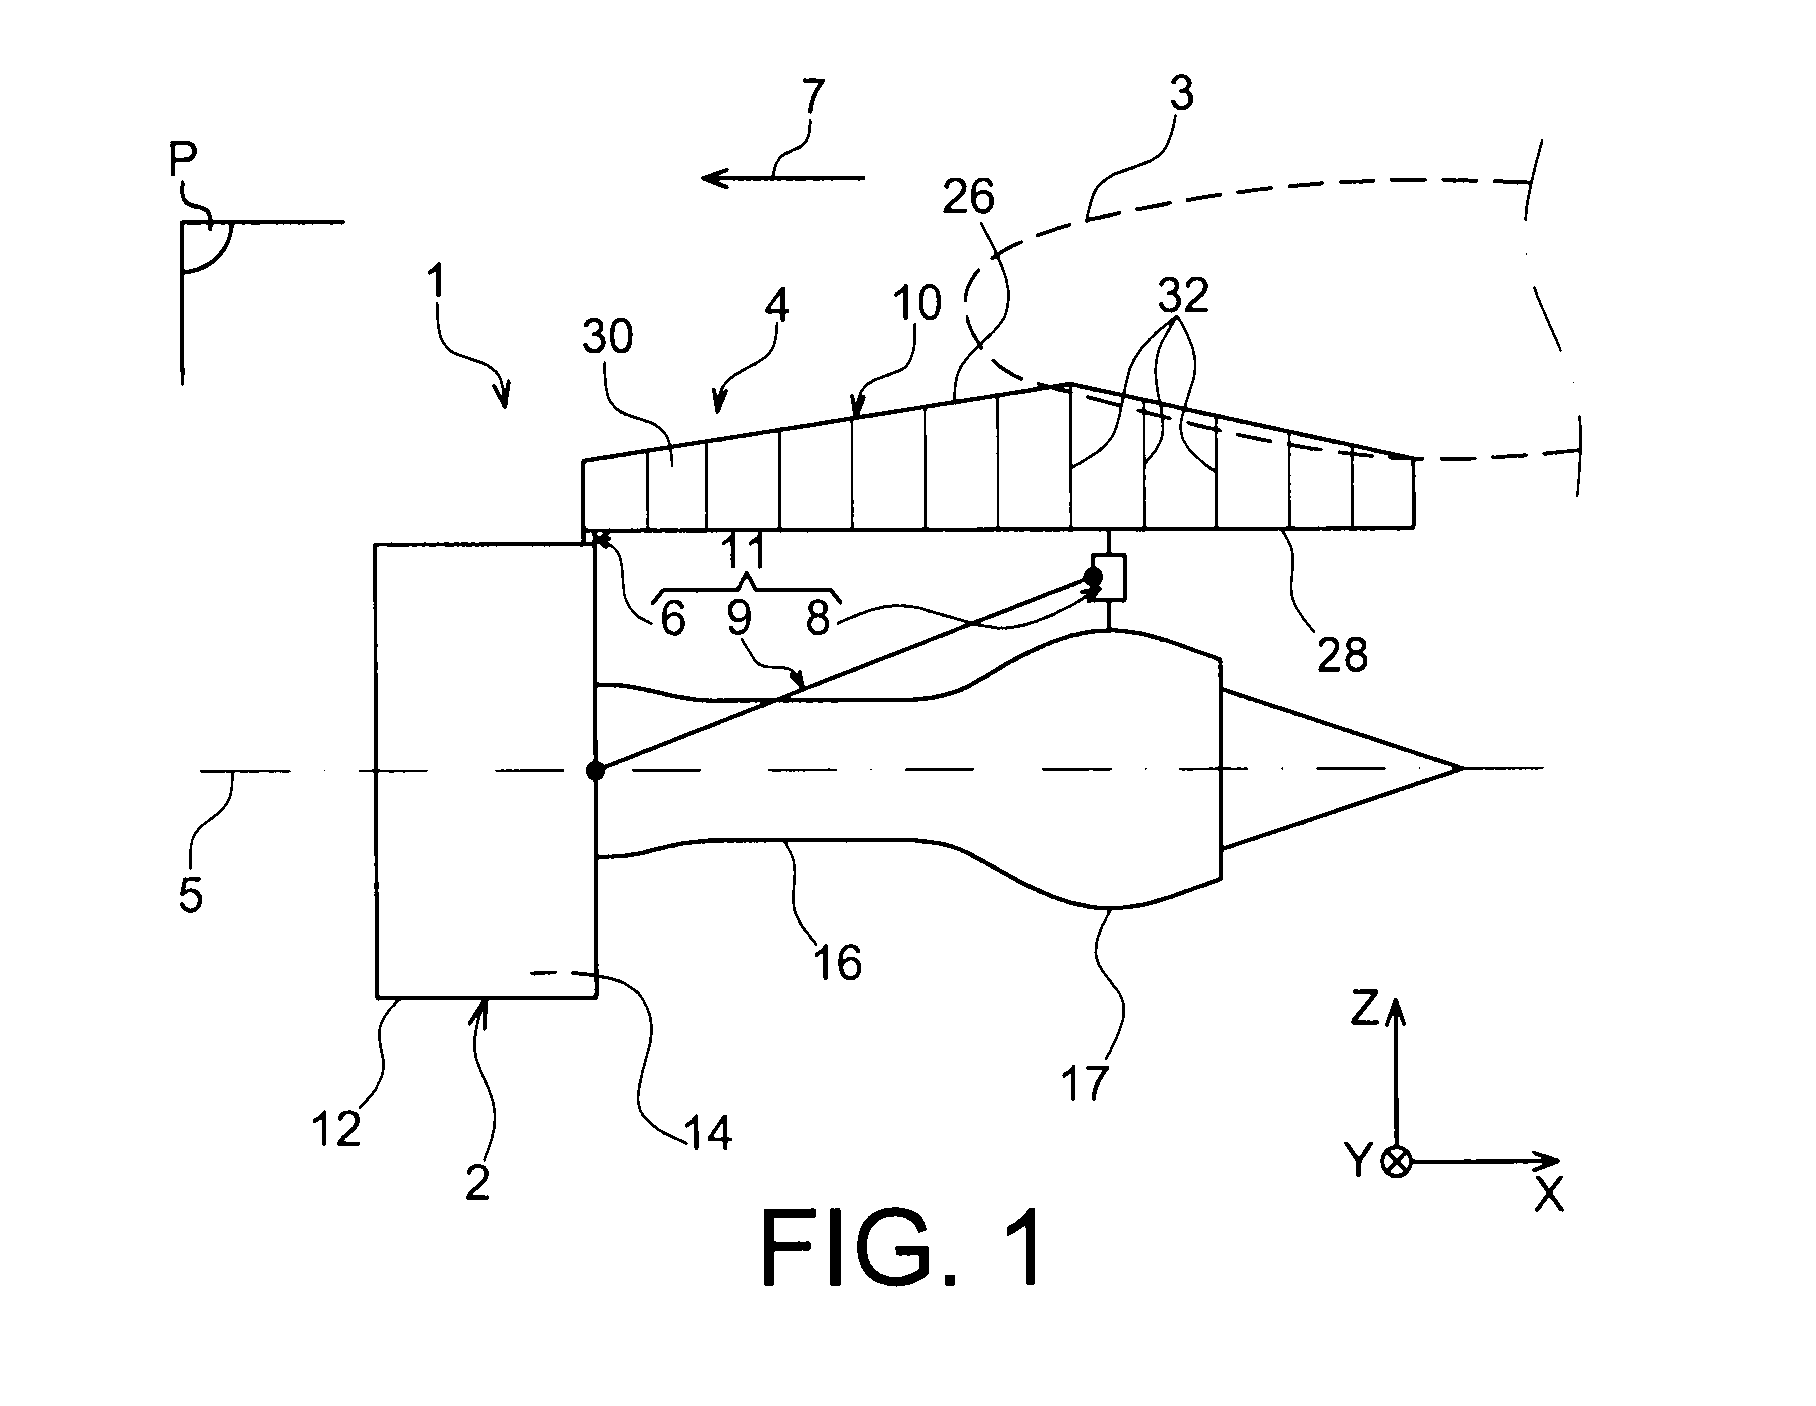 Engine mounting structure for aircraft having a beam spreader connected at four points